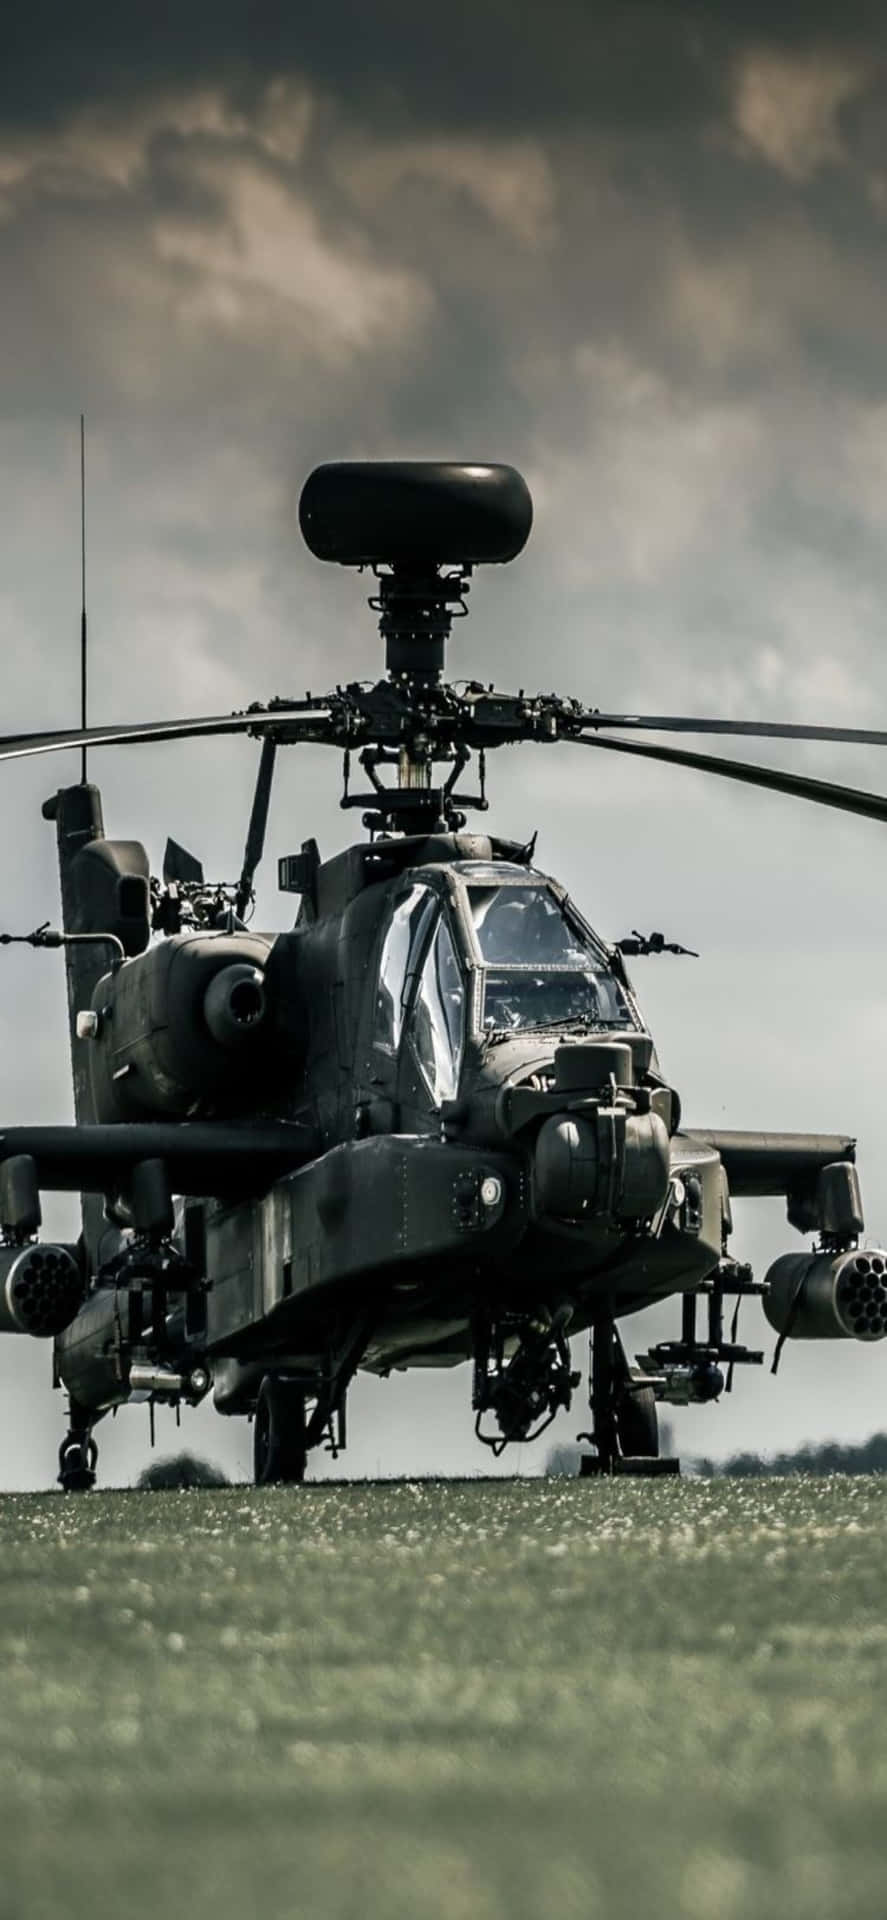 helicopter military iphone 5 wallpaper